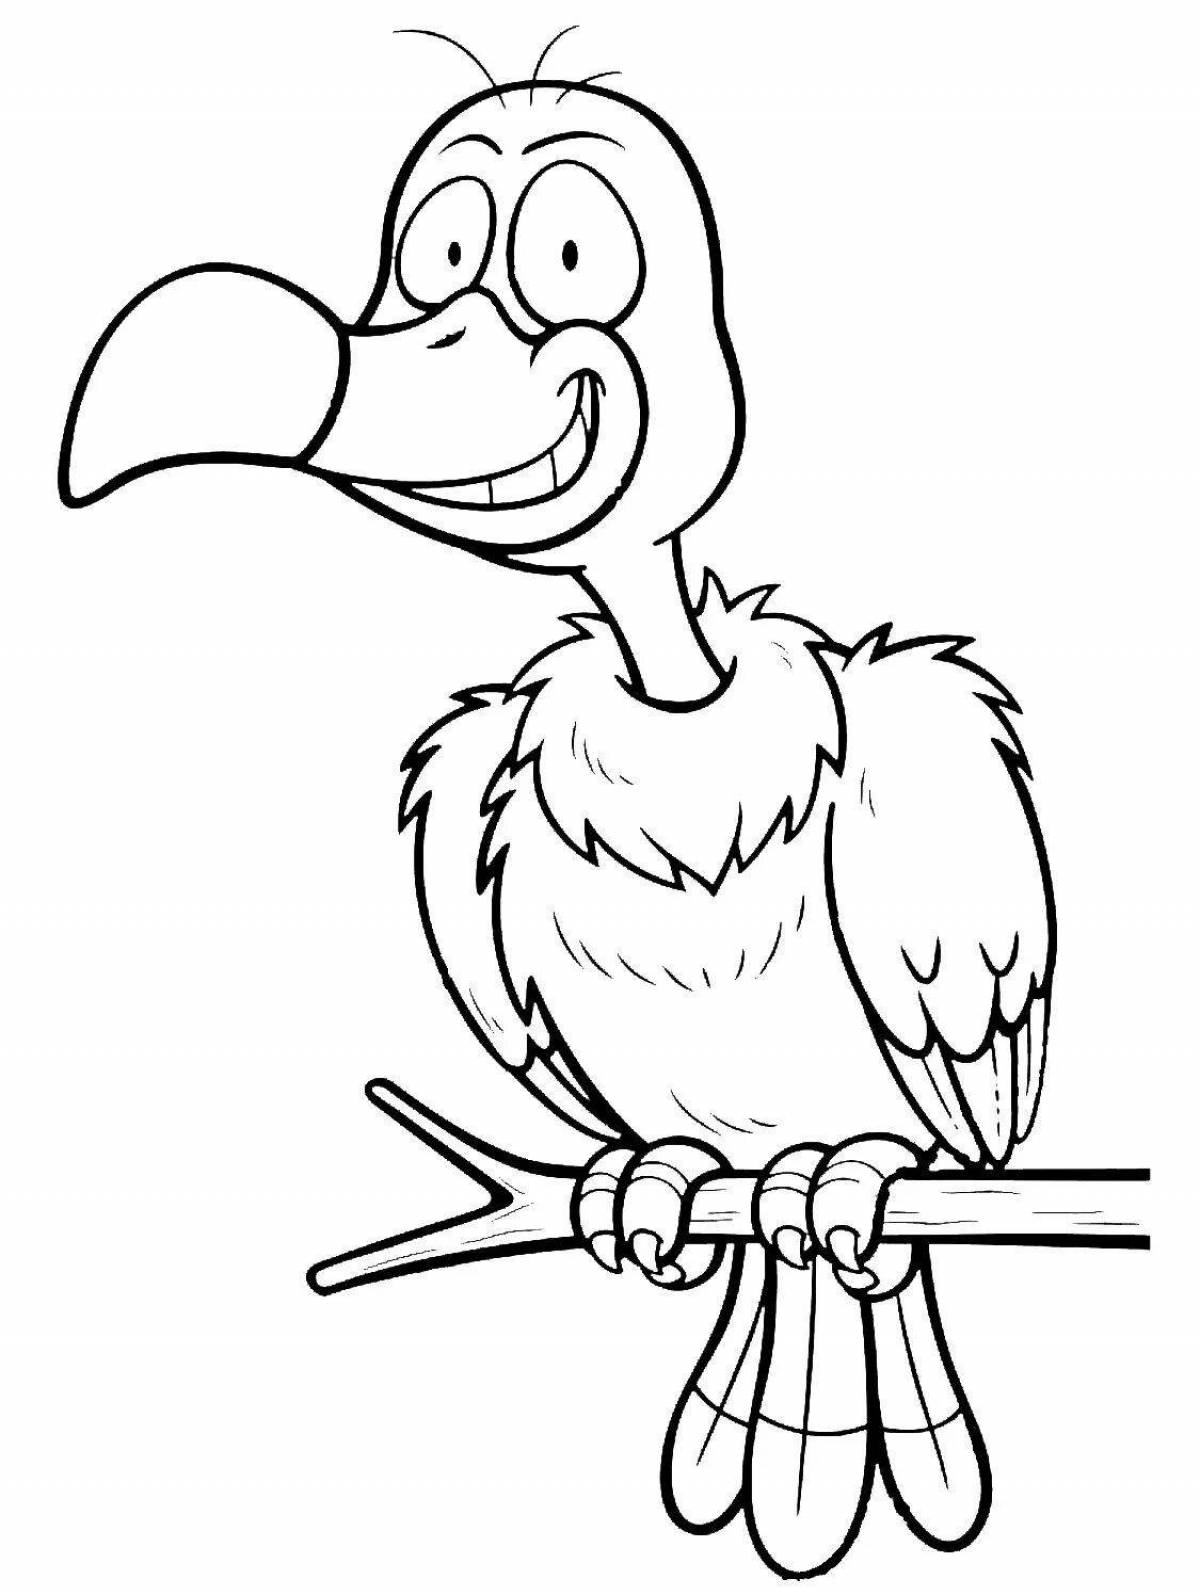 Flawless Vulture coloring page